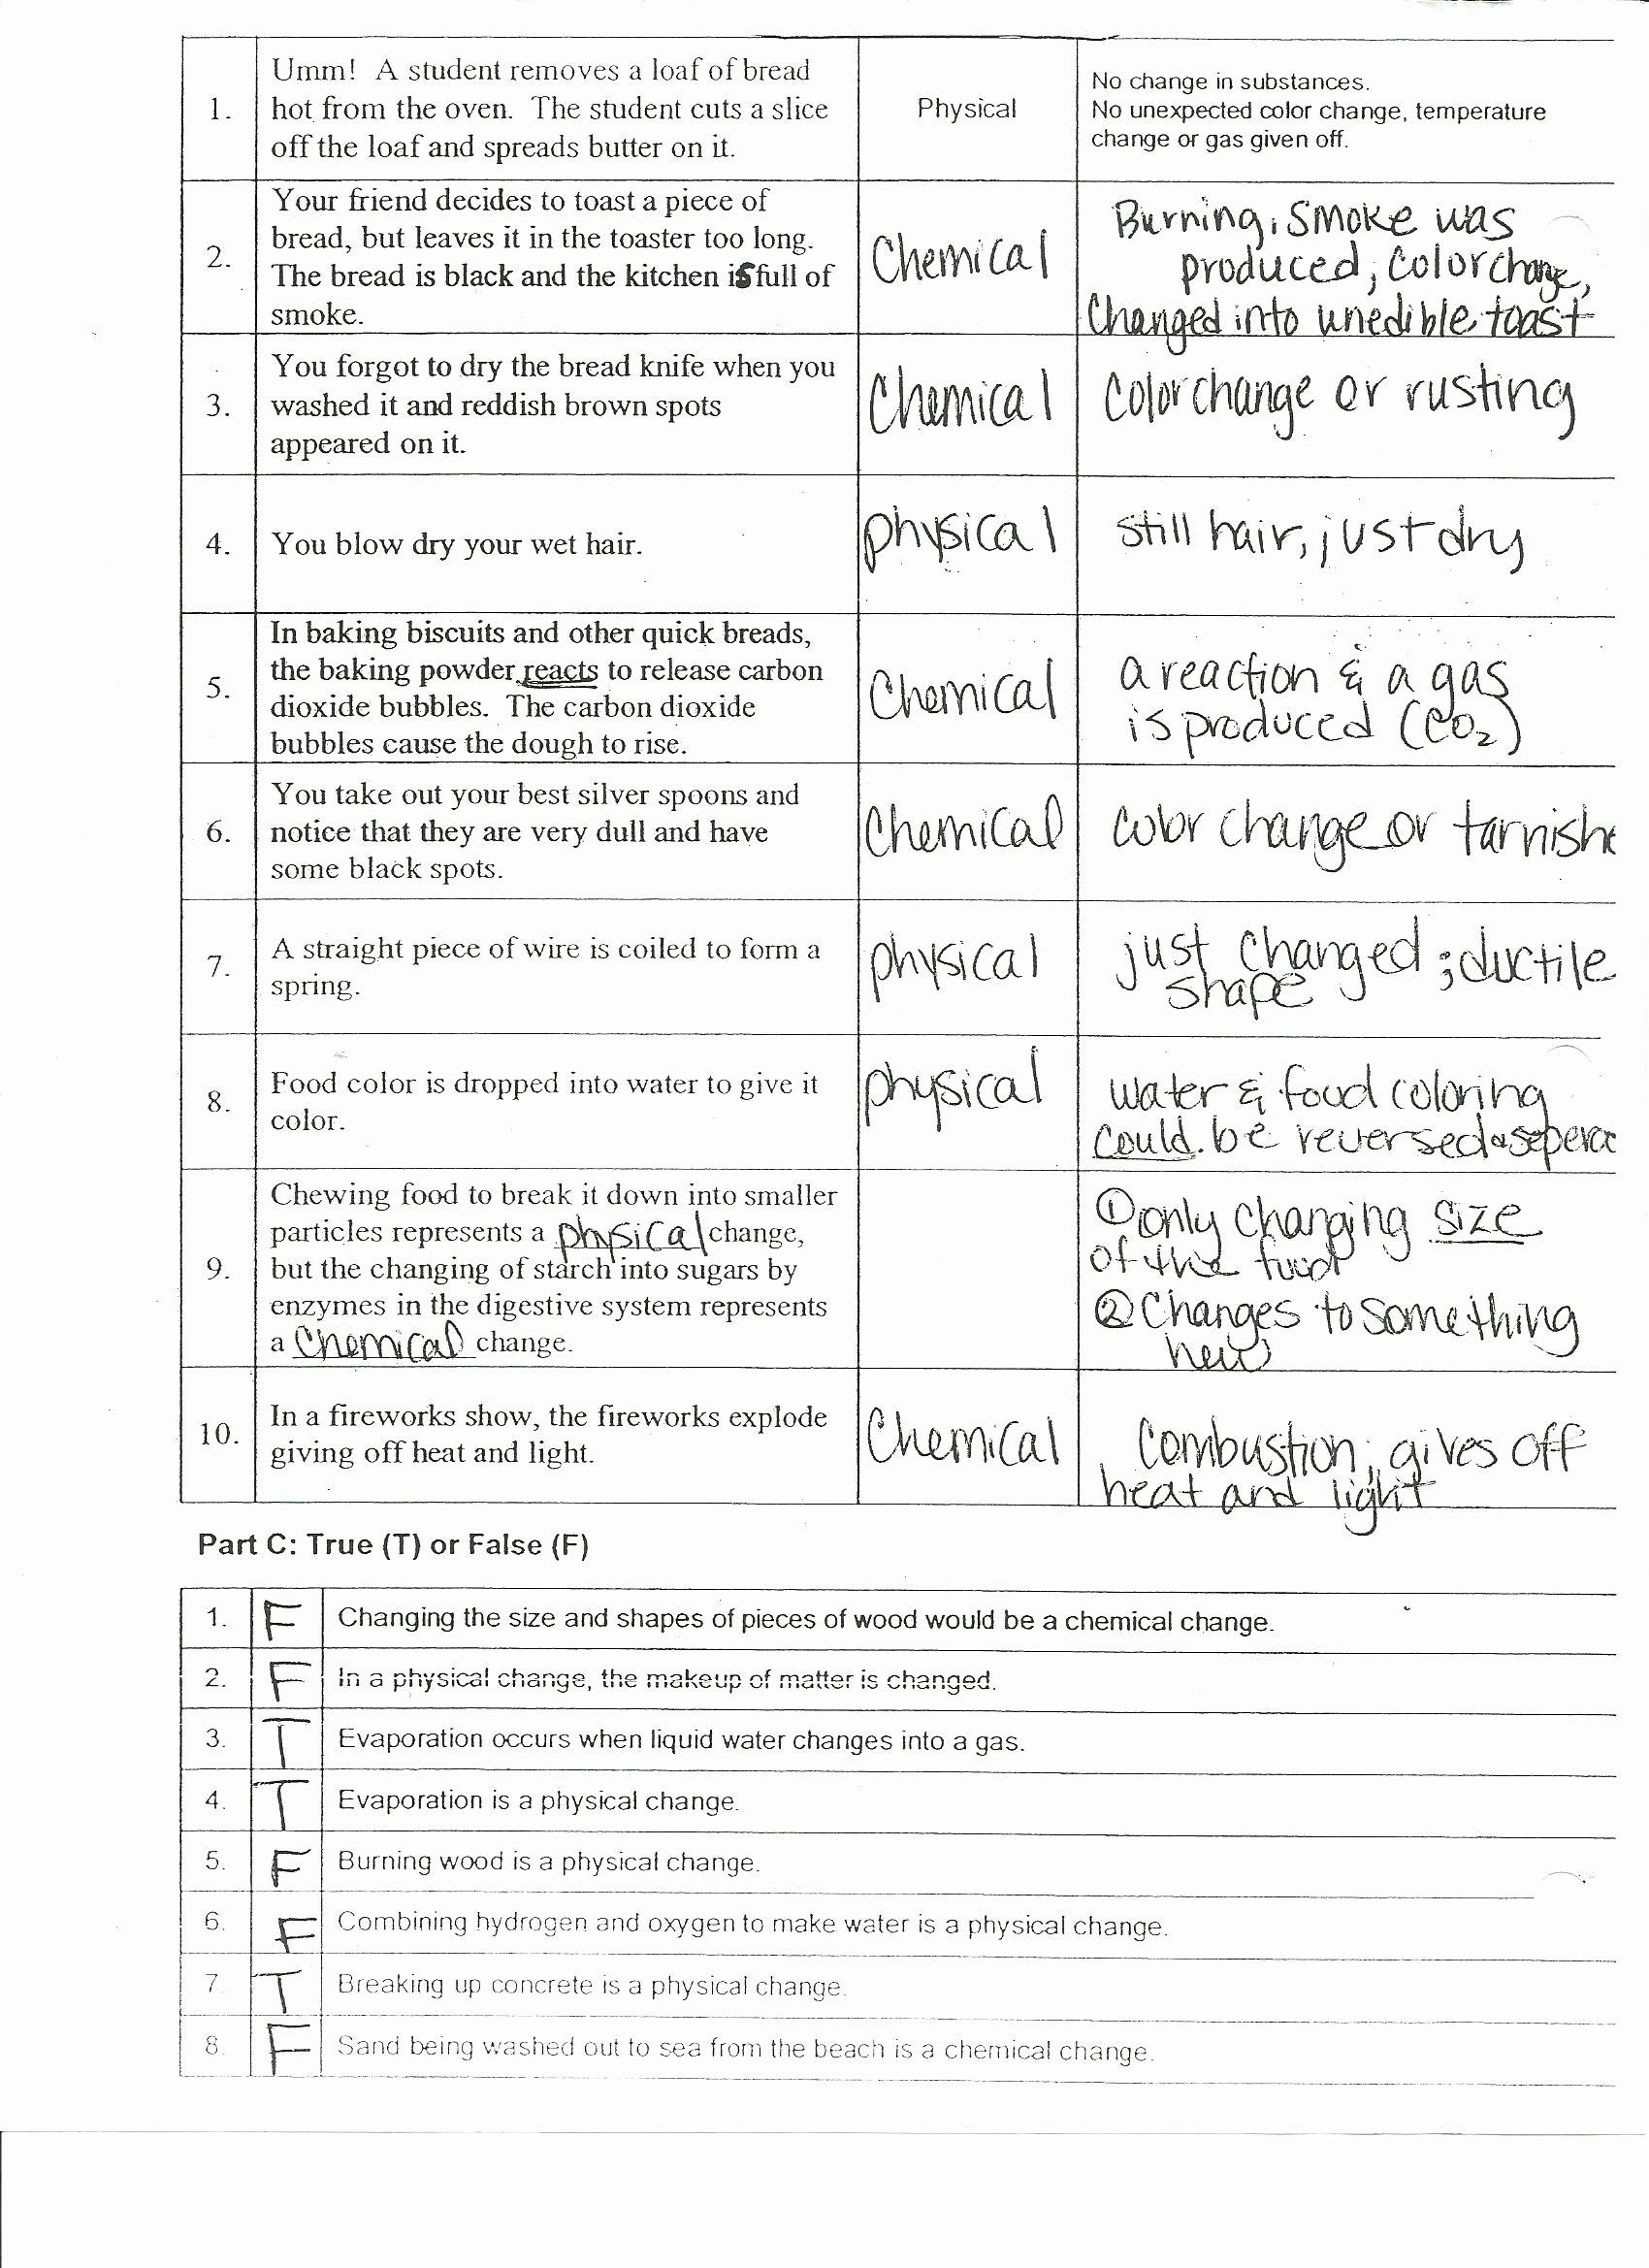 Chemical and Physical Changes Worksheet 50 Physical and Chemical Change Worksheet In 2020 with